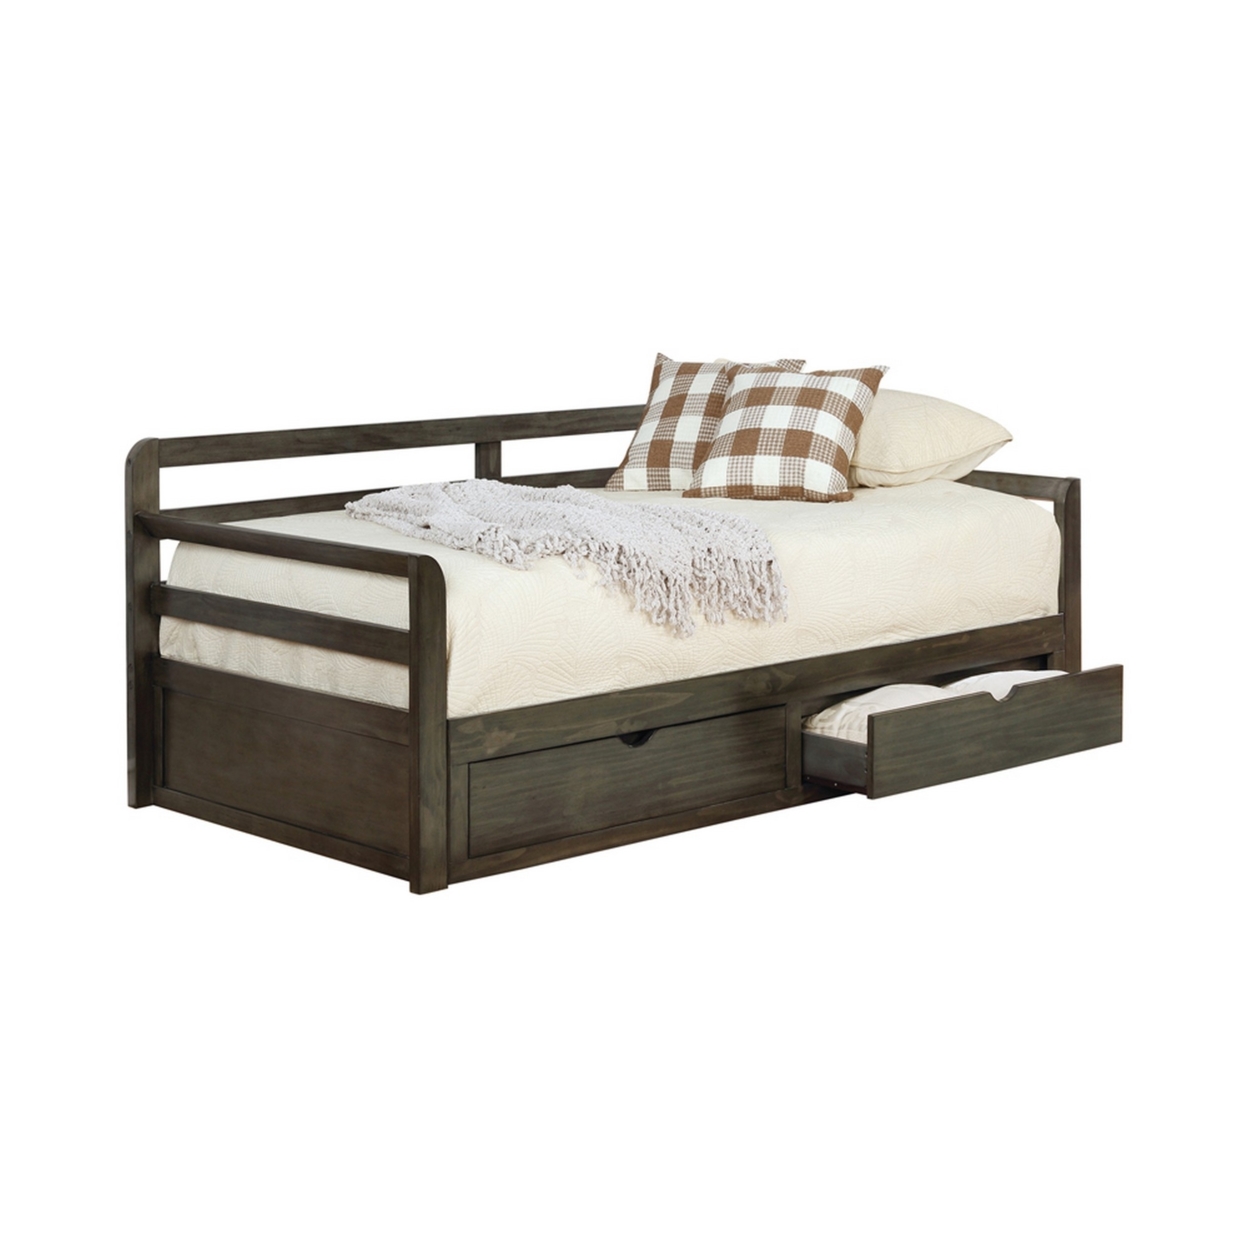 Two Drawer Wooden Extra Large Twin Size Bed With Trundle, Brown- Saltoro Sherpi